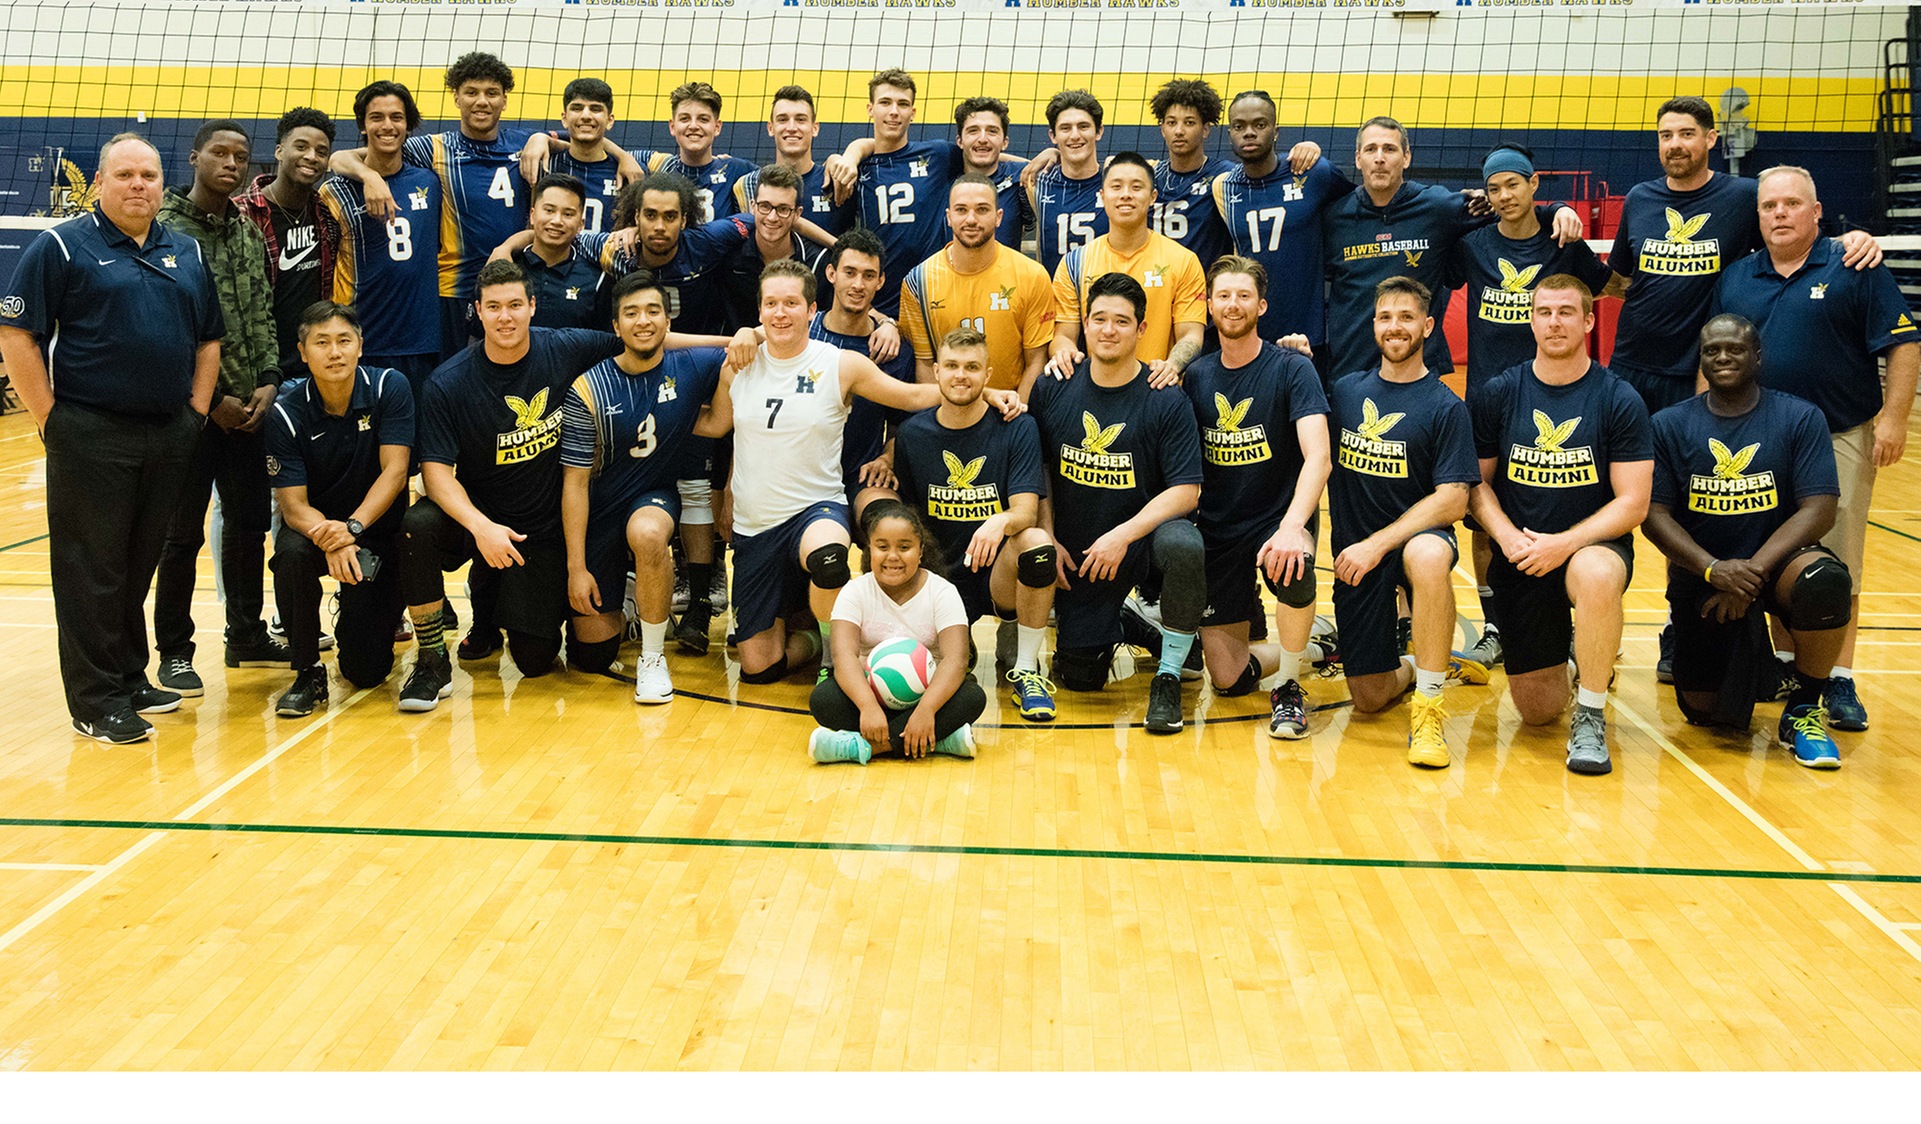 MEN'S VOLLEYBALL ALUMNI PROVIDE A TOUGH TEST FOR THE NEW HAWKS